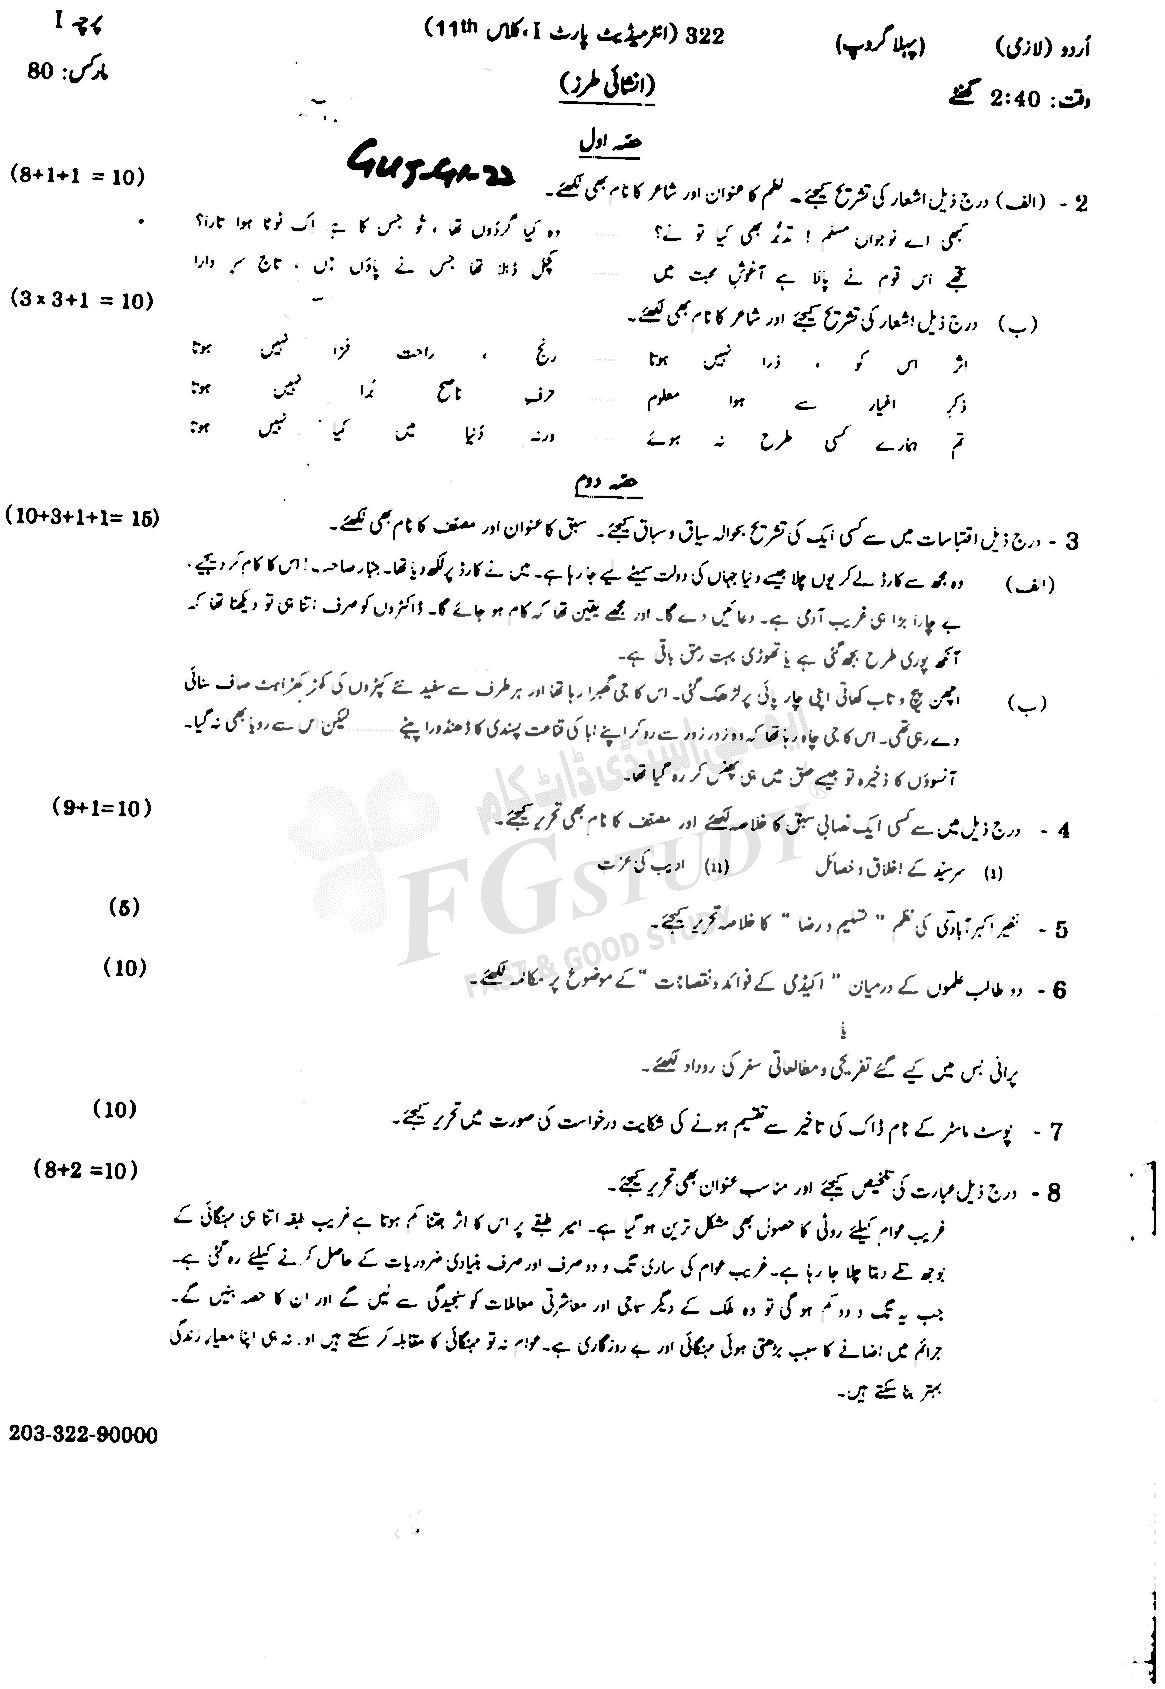 11th Class Urdu Past Paper 2022 Gujranwala Board Group 1 Subjective